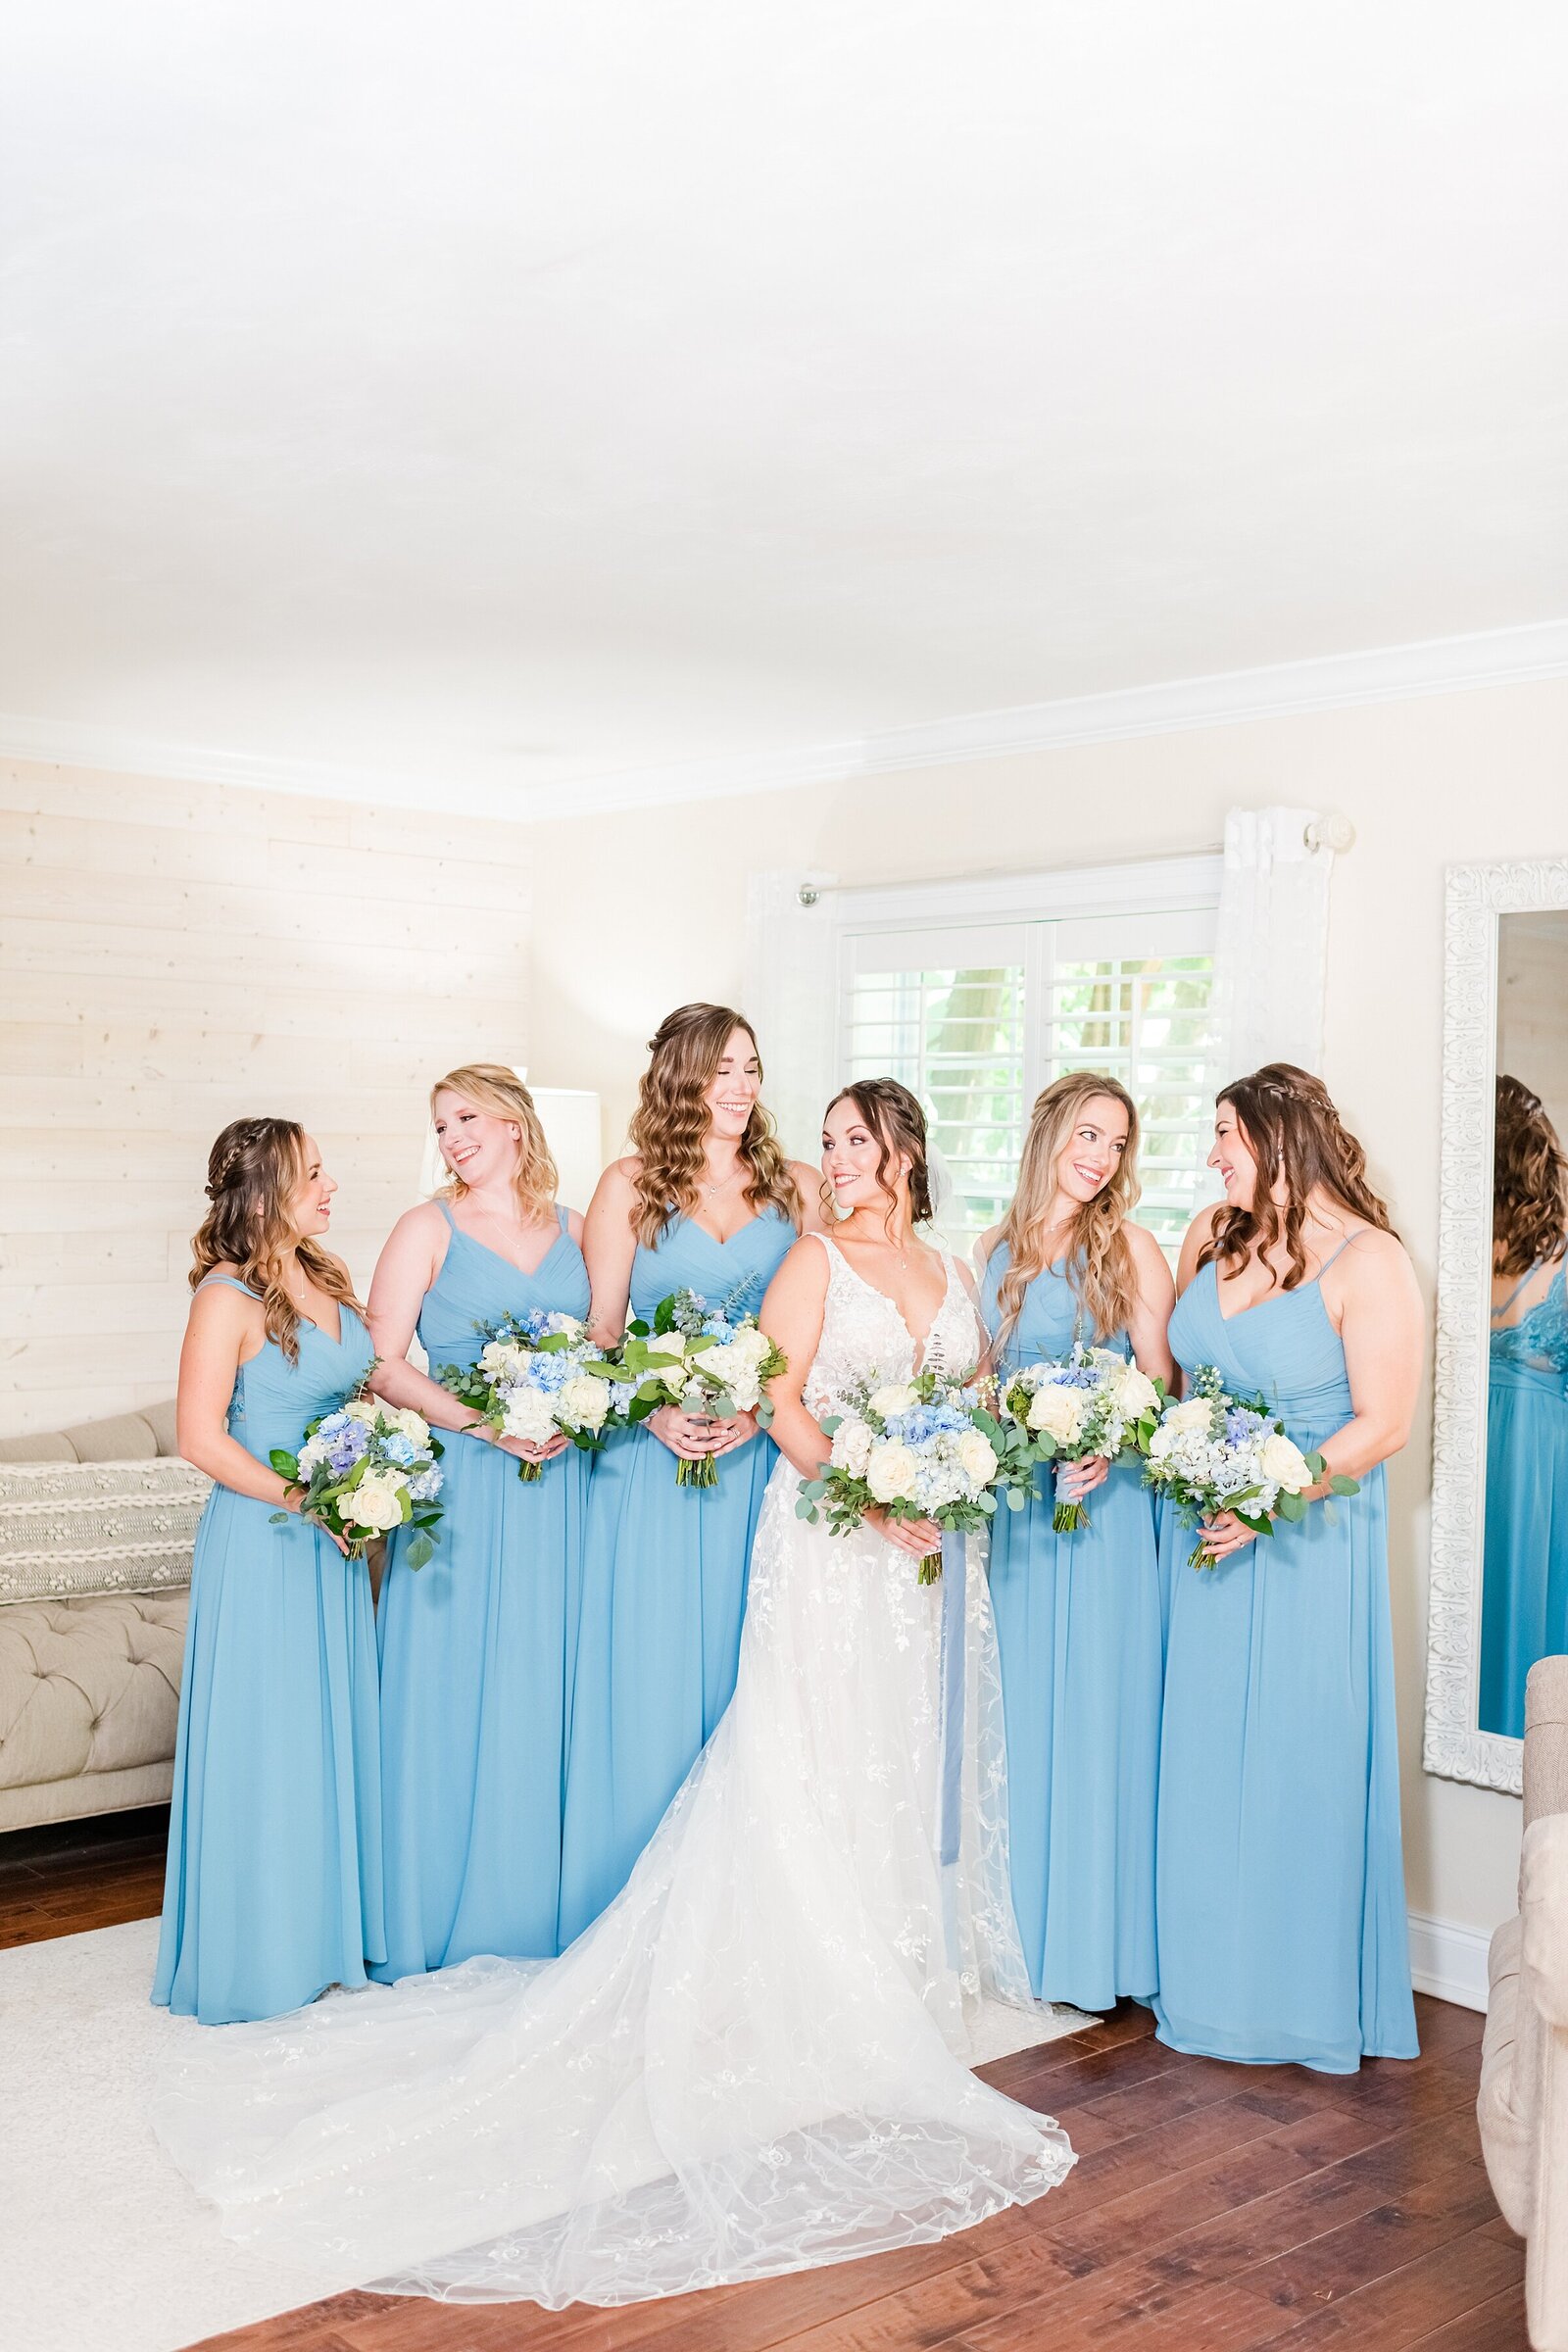 Wedding Venue in New Symerna | The Delamater House Wedding | Chynna Pacheco Photography-183